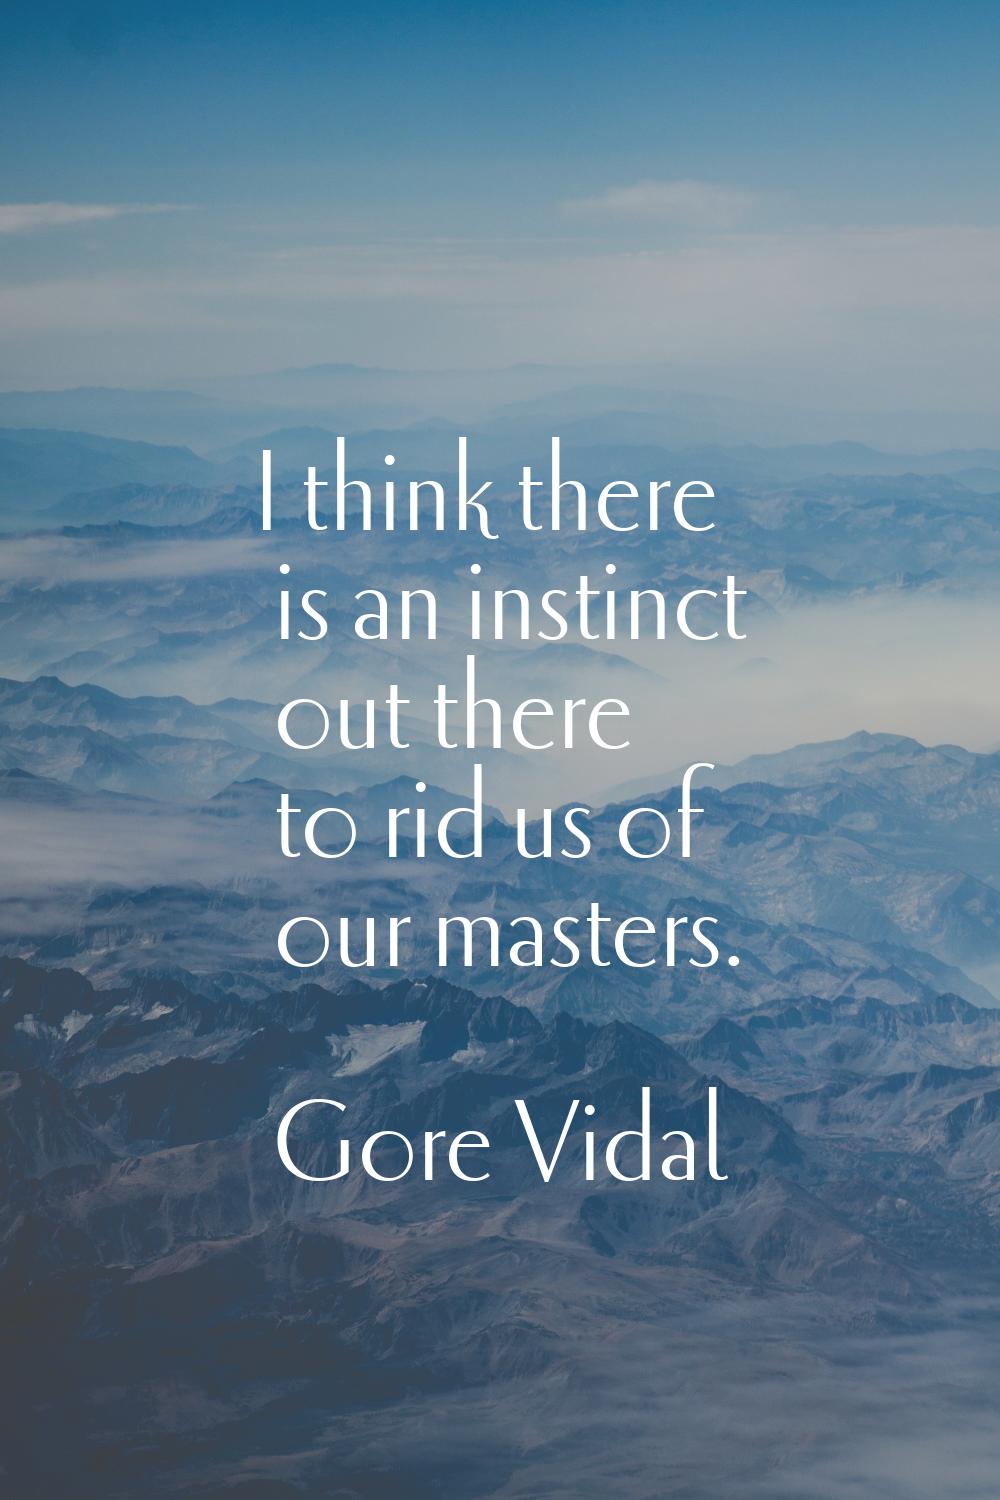 I think there is an instinct out there to rid us of our masters.